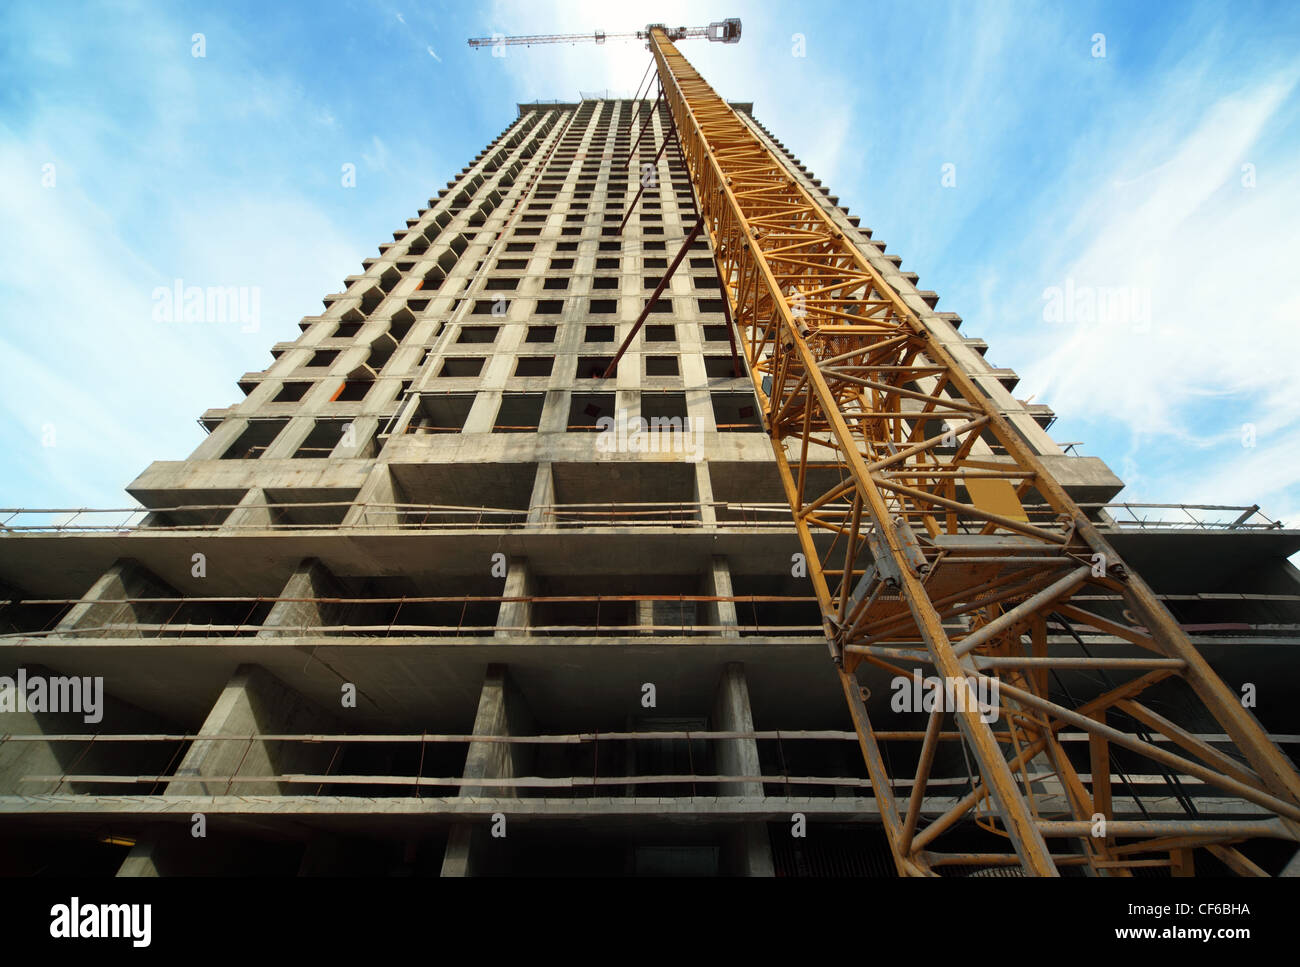 MOSCOW SEPTEMBER 27 Tall building under construction crane Losiny Island residential complex Donstroy company September 7 2010 Stock Photo